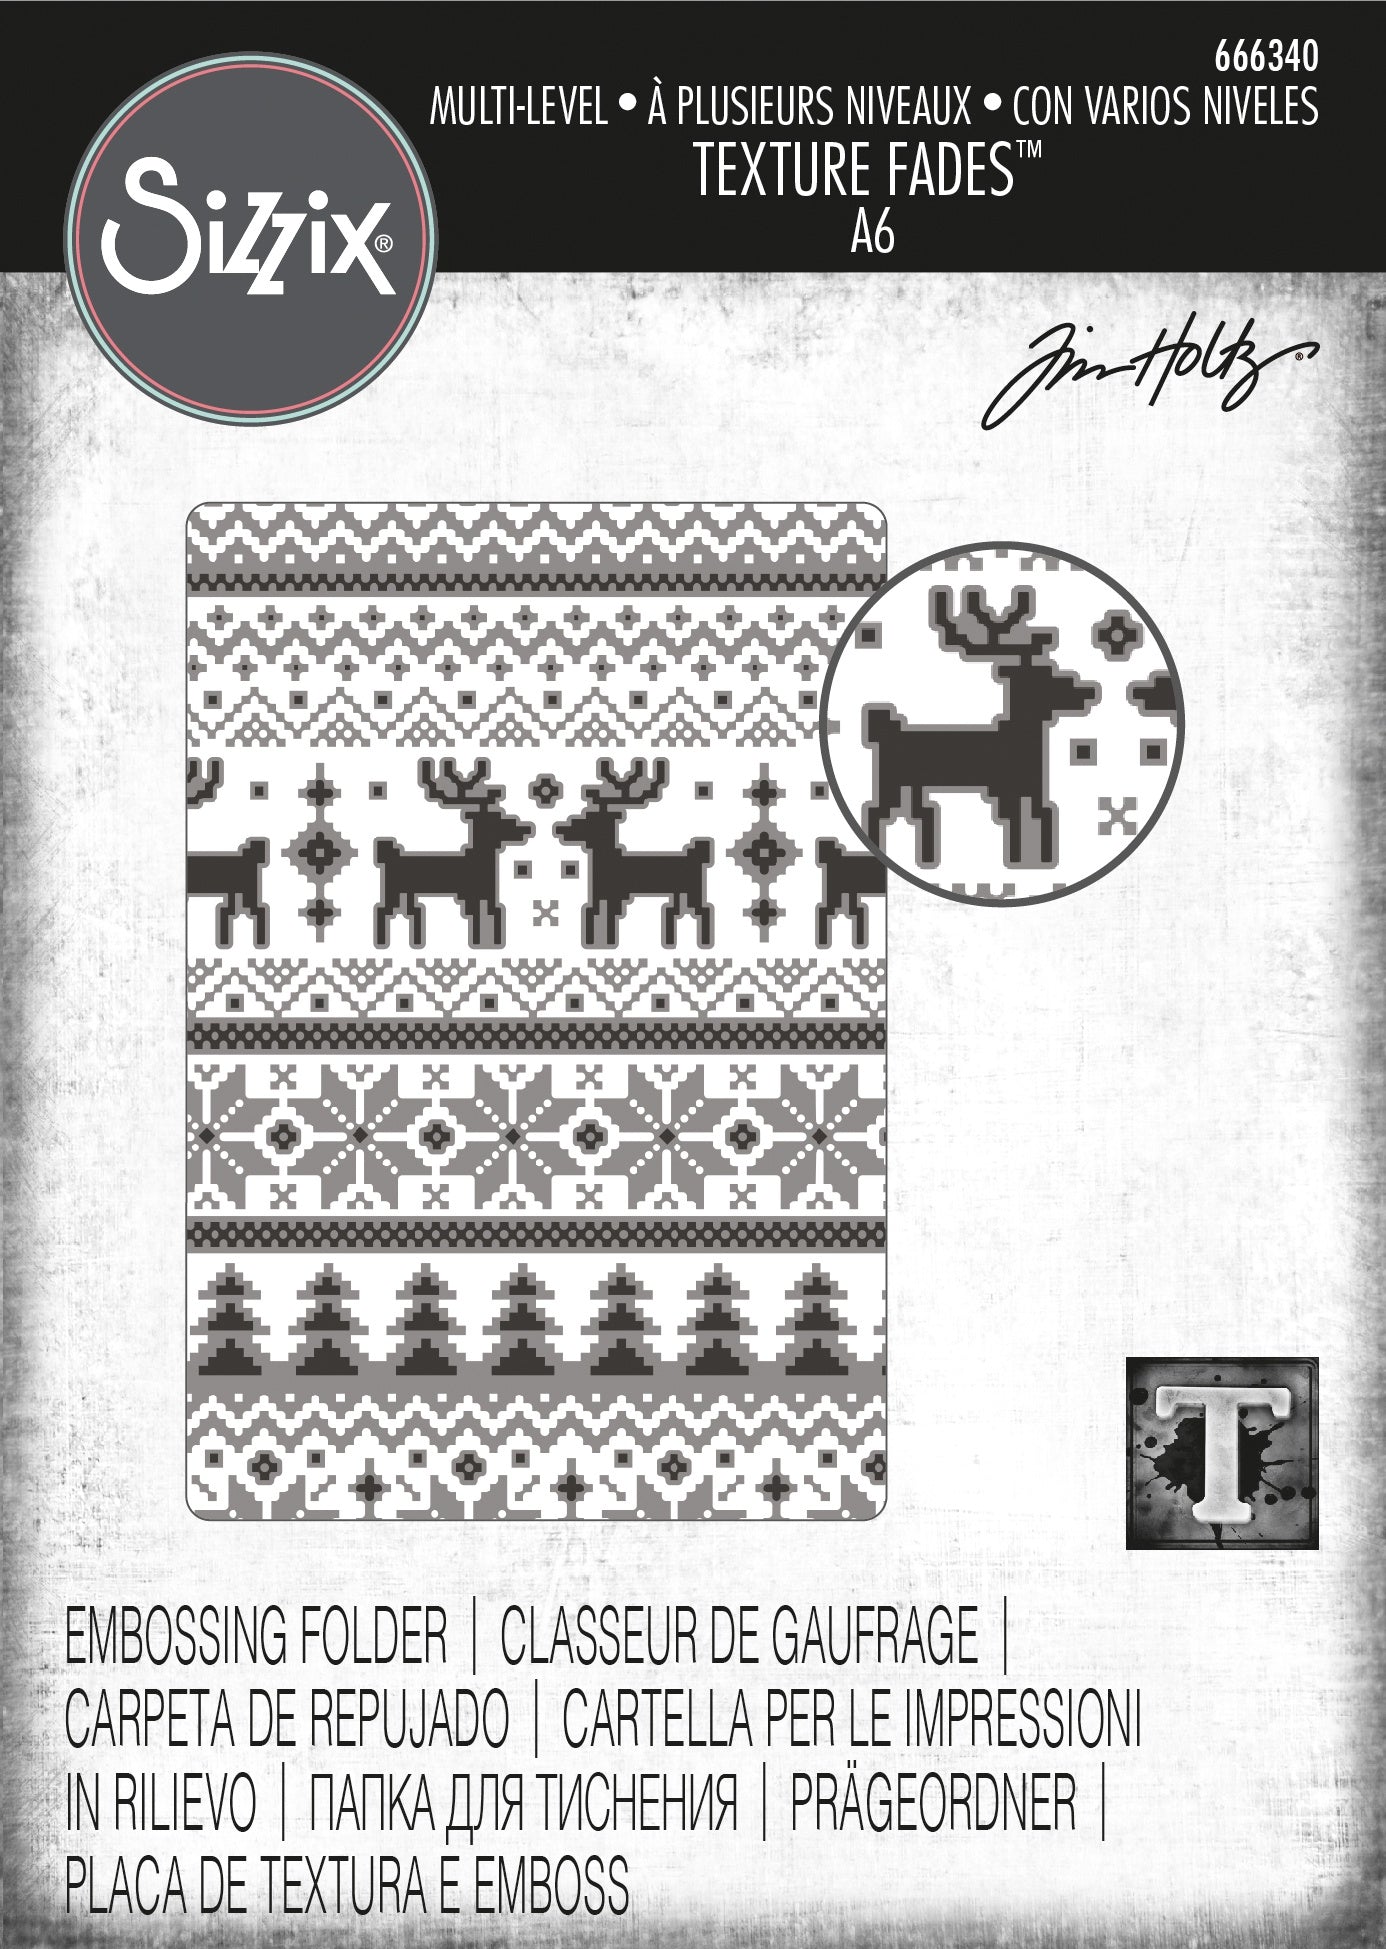 Tim Holtz - Holiday Knit Multi-Level Texture Fades Embossing Folder